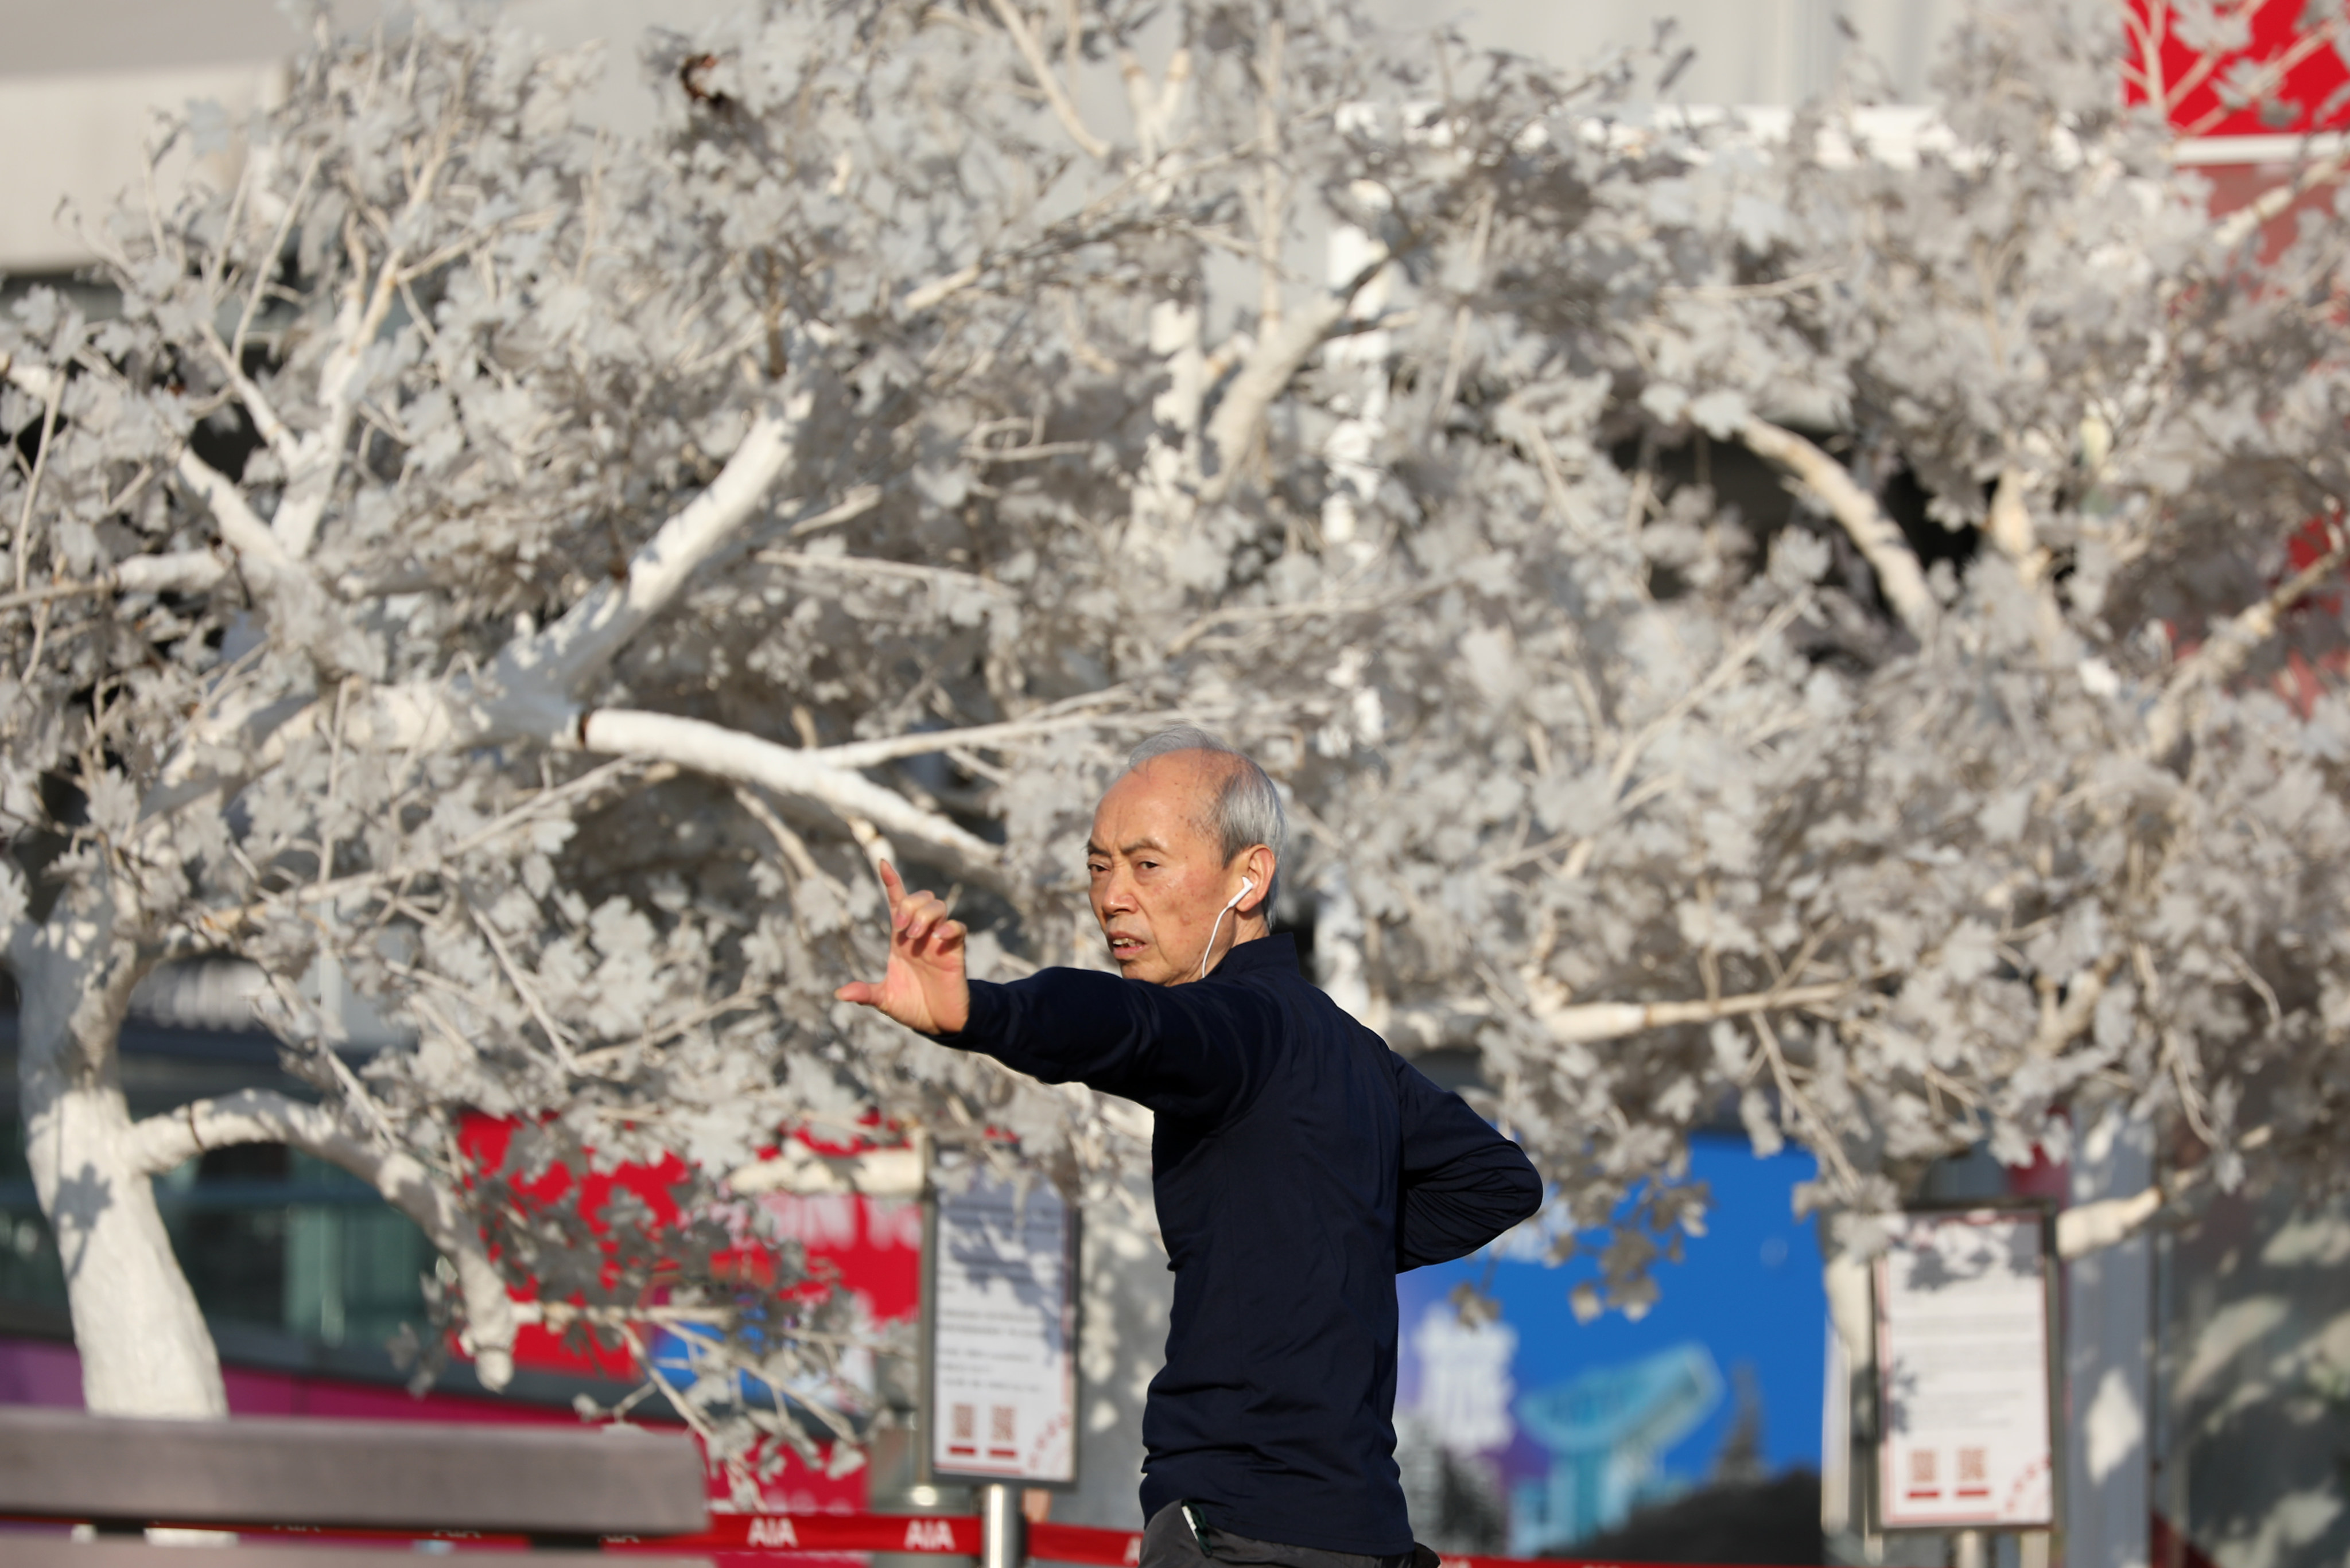 An elderly man exercises in Hong Kong’s Central district on December 30, 2020. Photo: Nora Tam